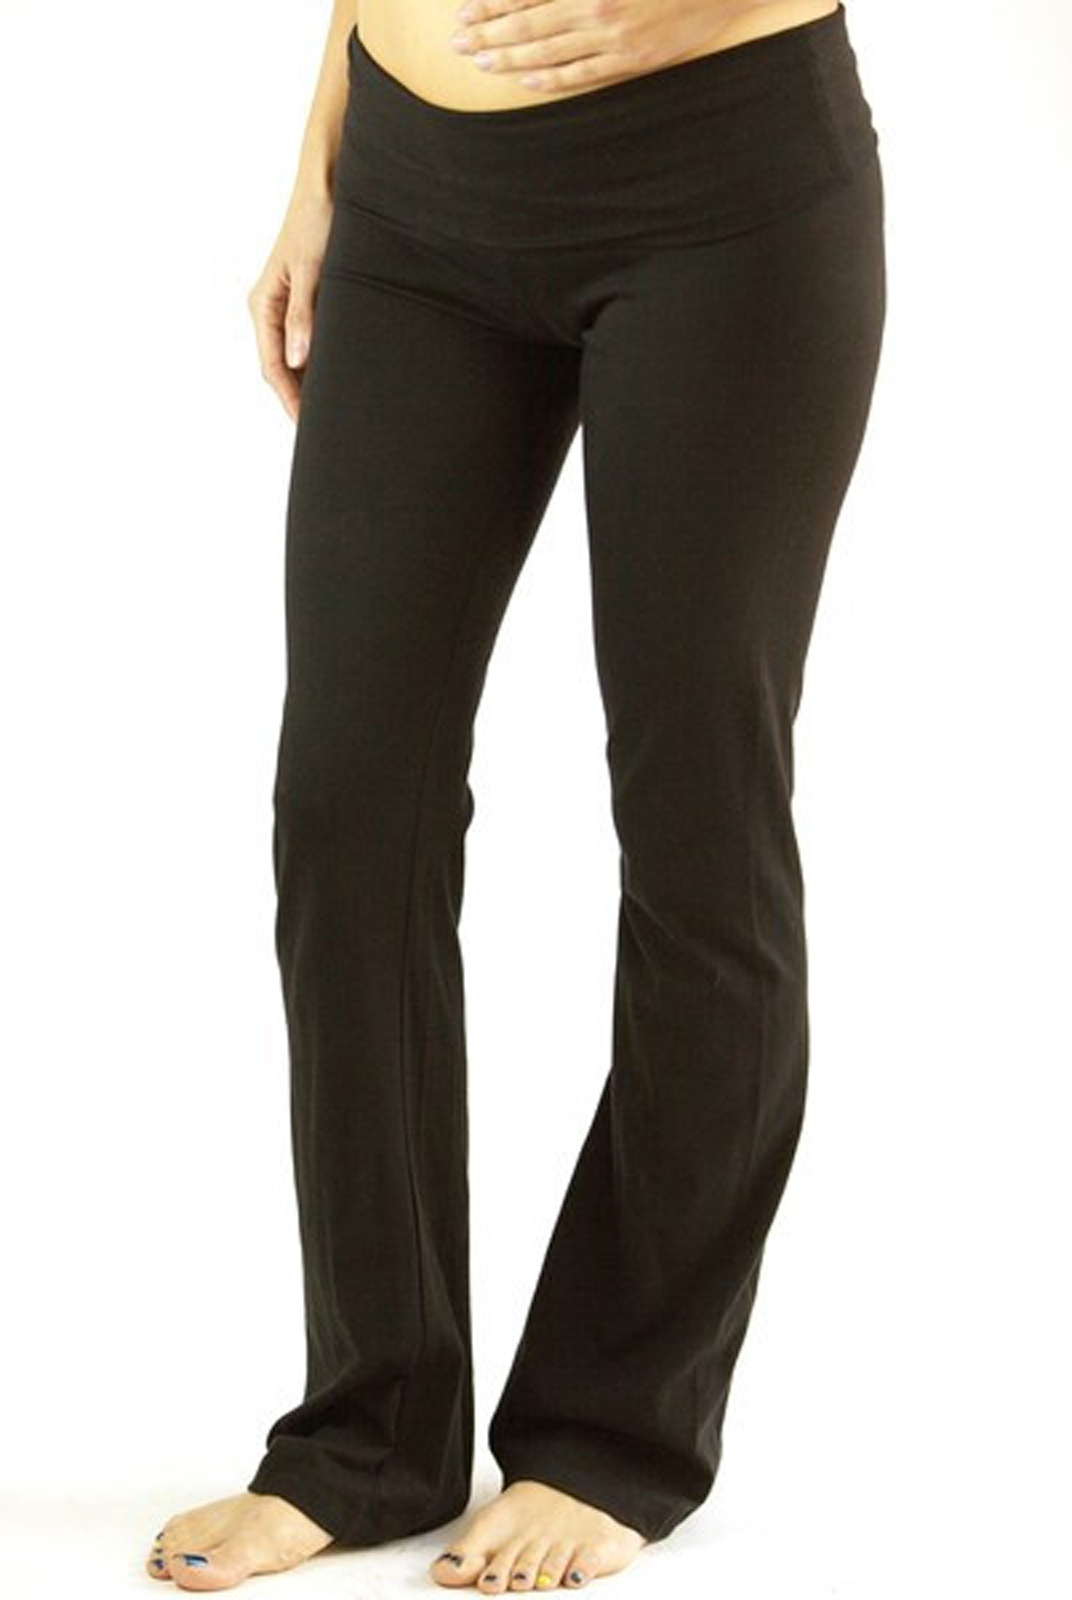 Maternity Yoga Pant - It's A Girl- Online Exclusive